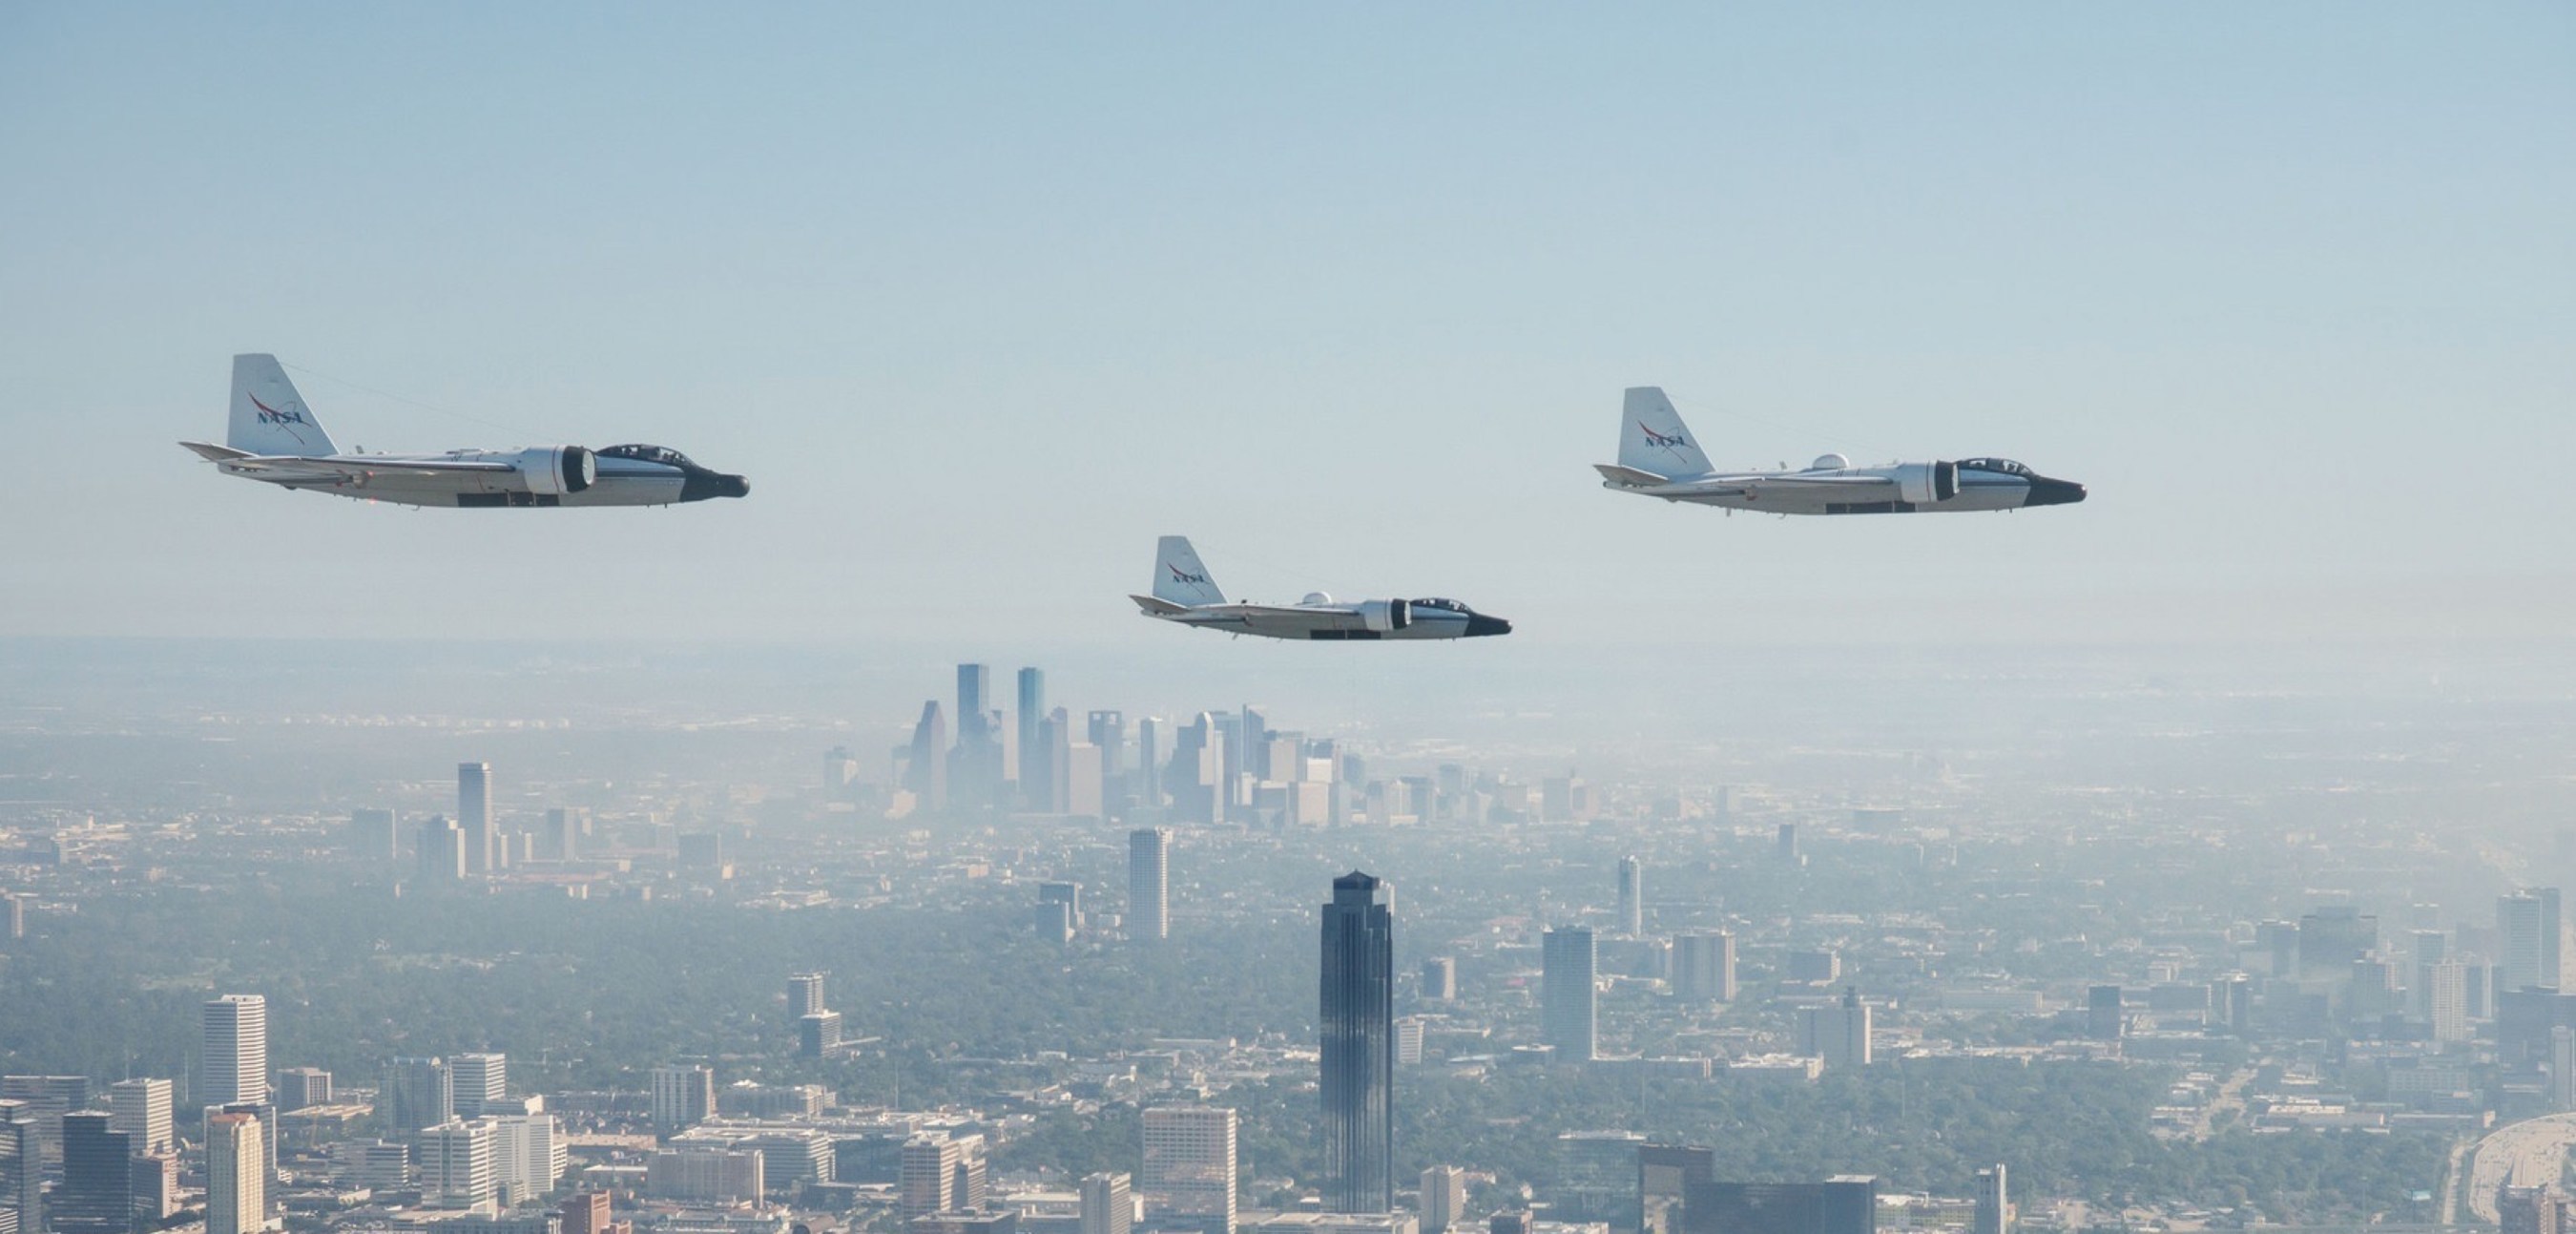 NASA's three WB-57s flying over Houston. This footage was captured by the AIRS/DyNAMITE system technology that was developed in Southern Research Engineering labs.